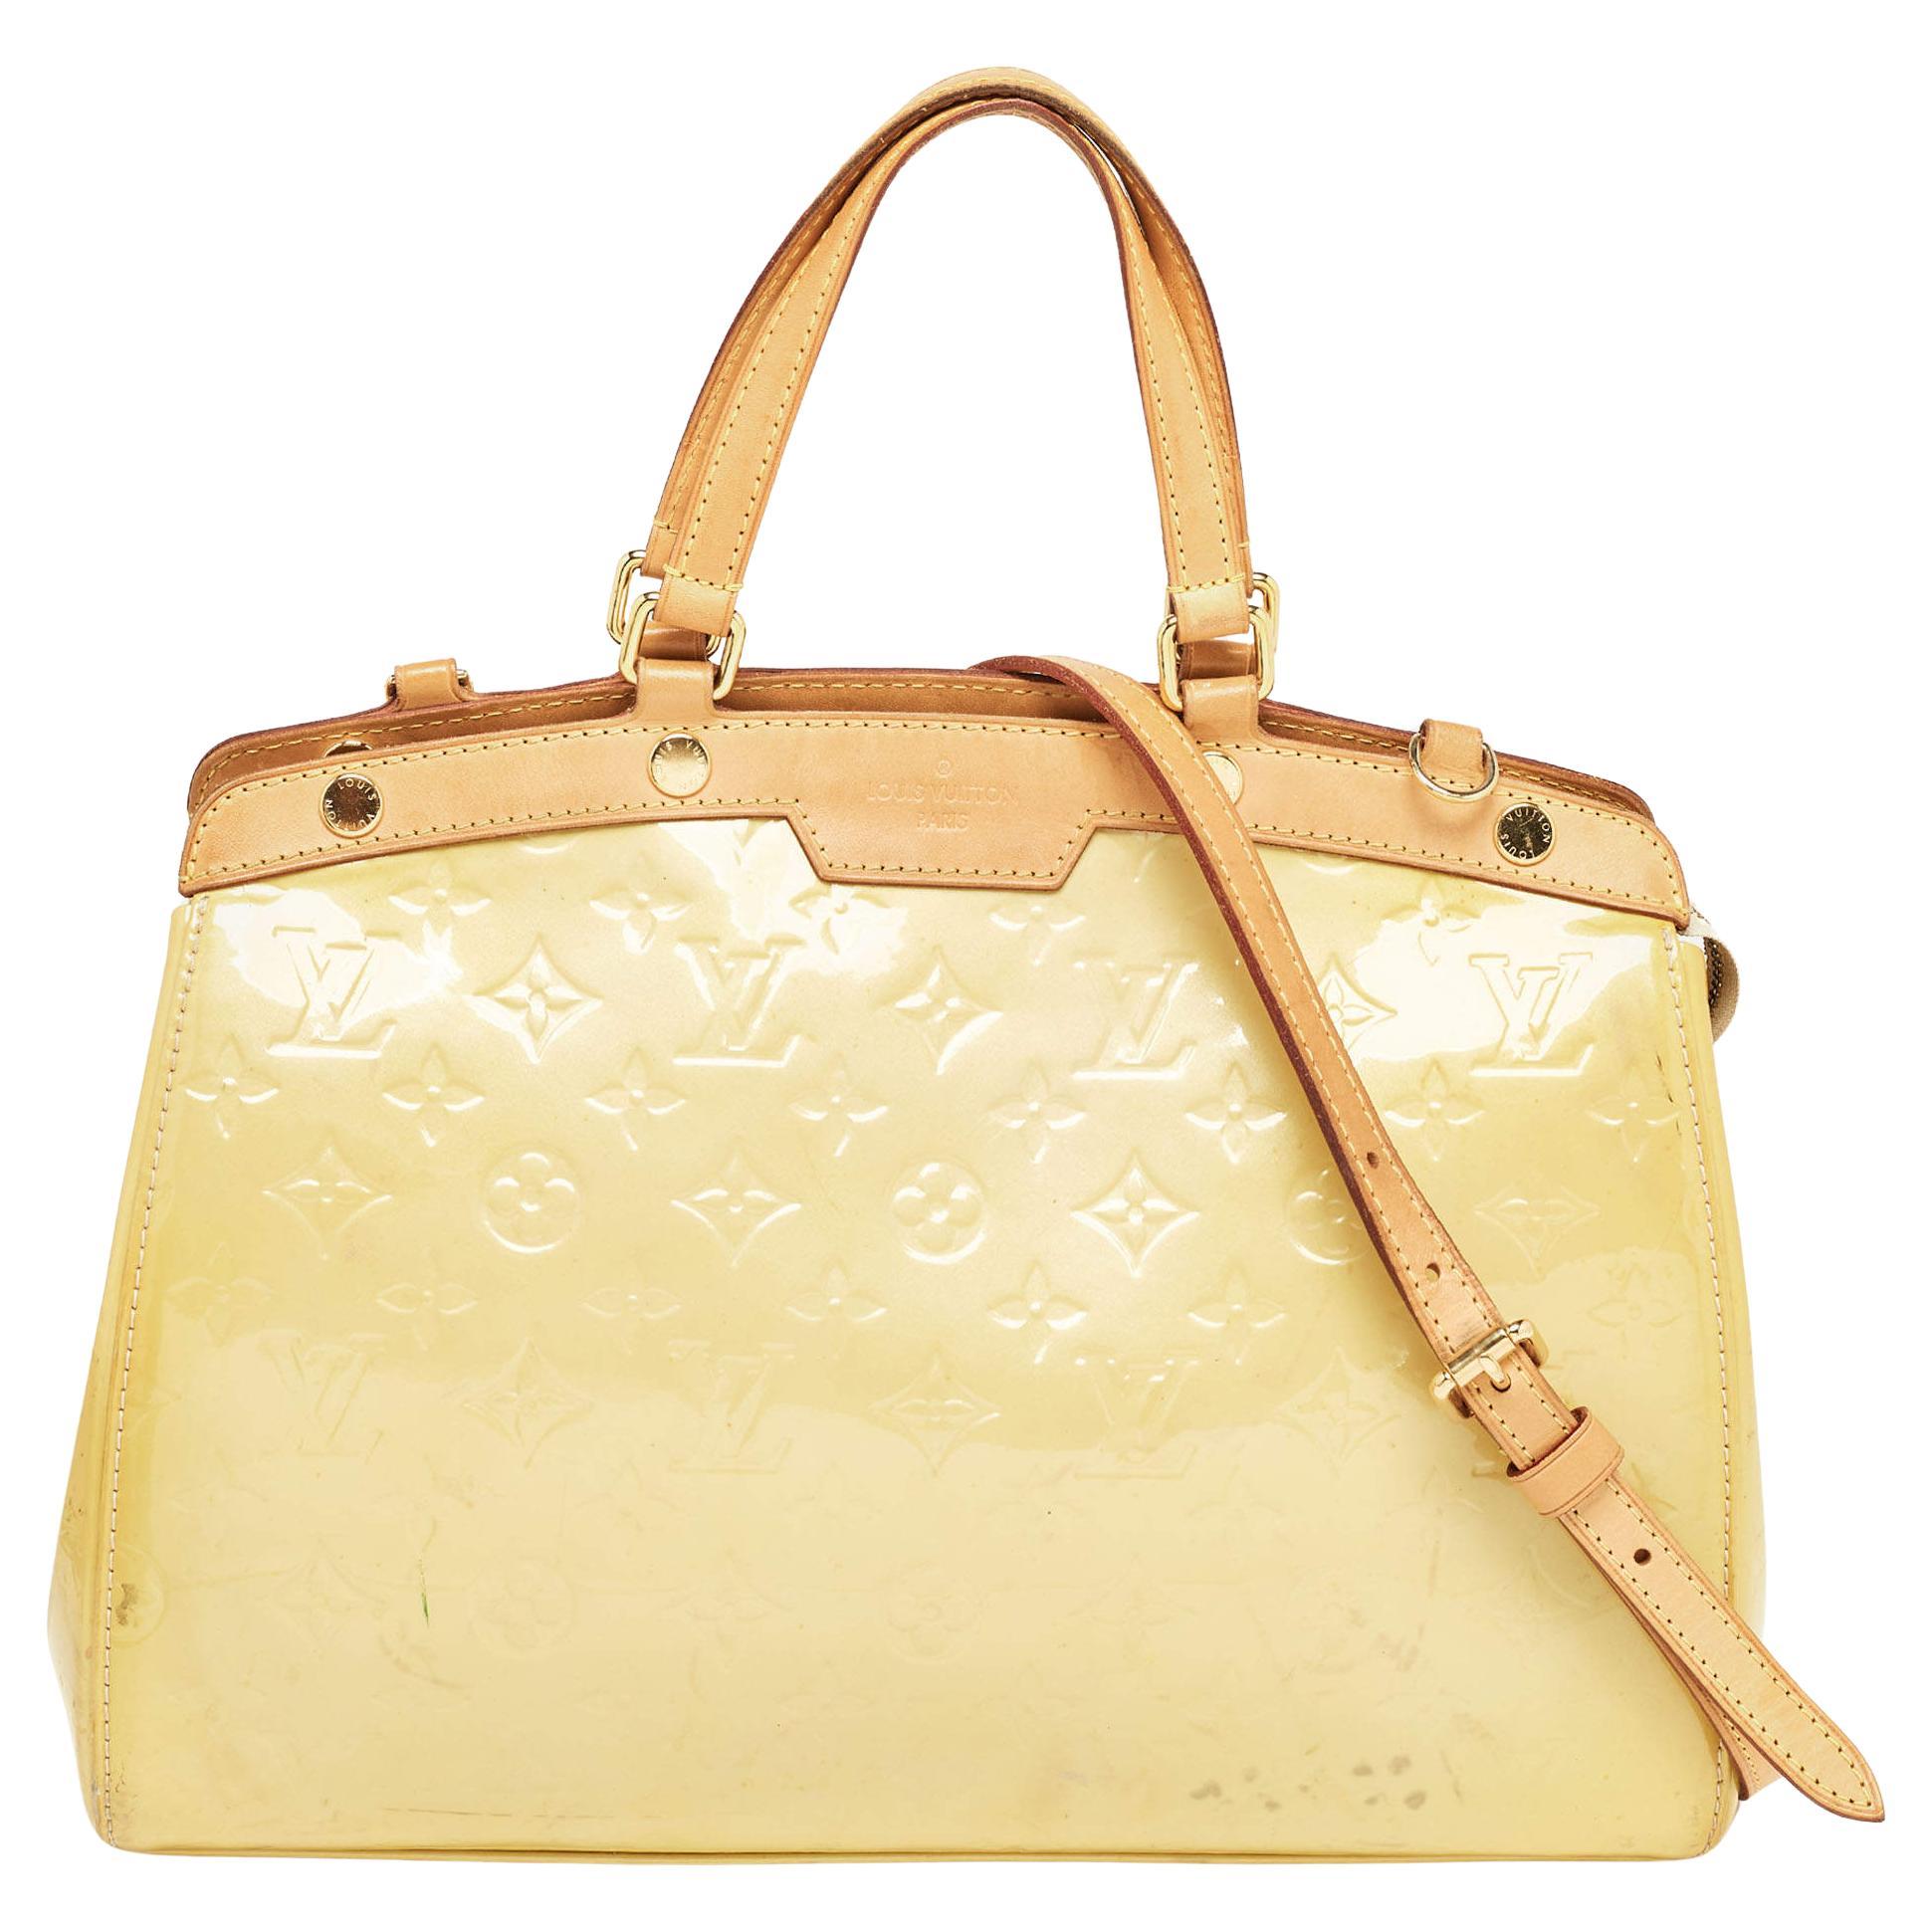 How do I find a Louis Vuitton Favorite MM?